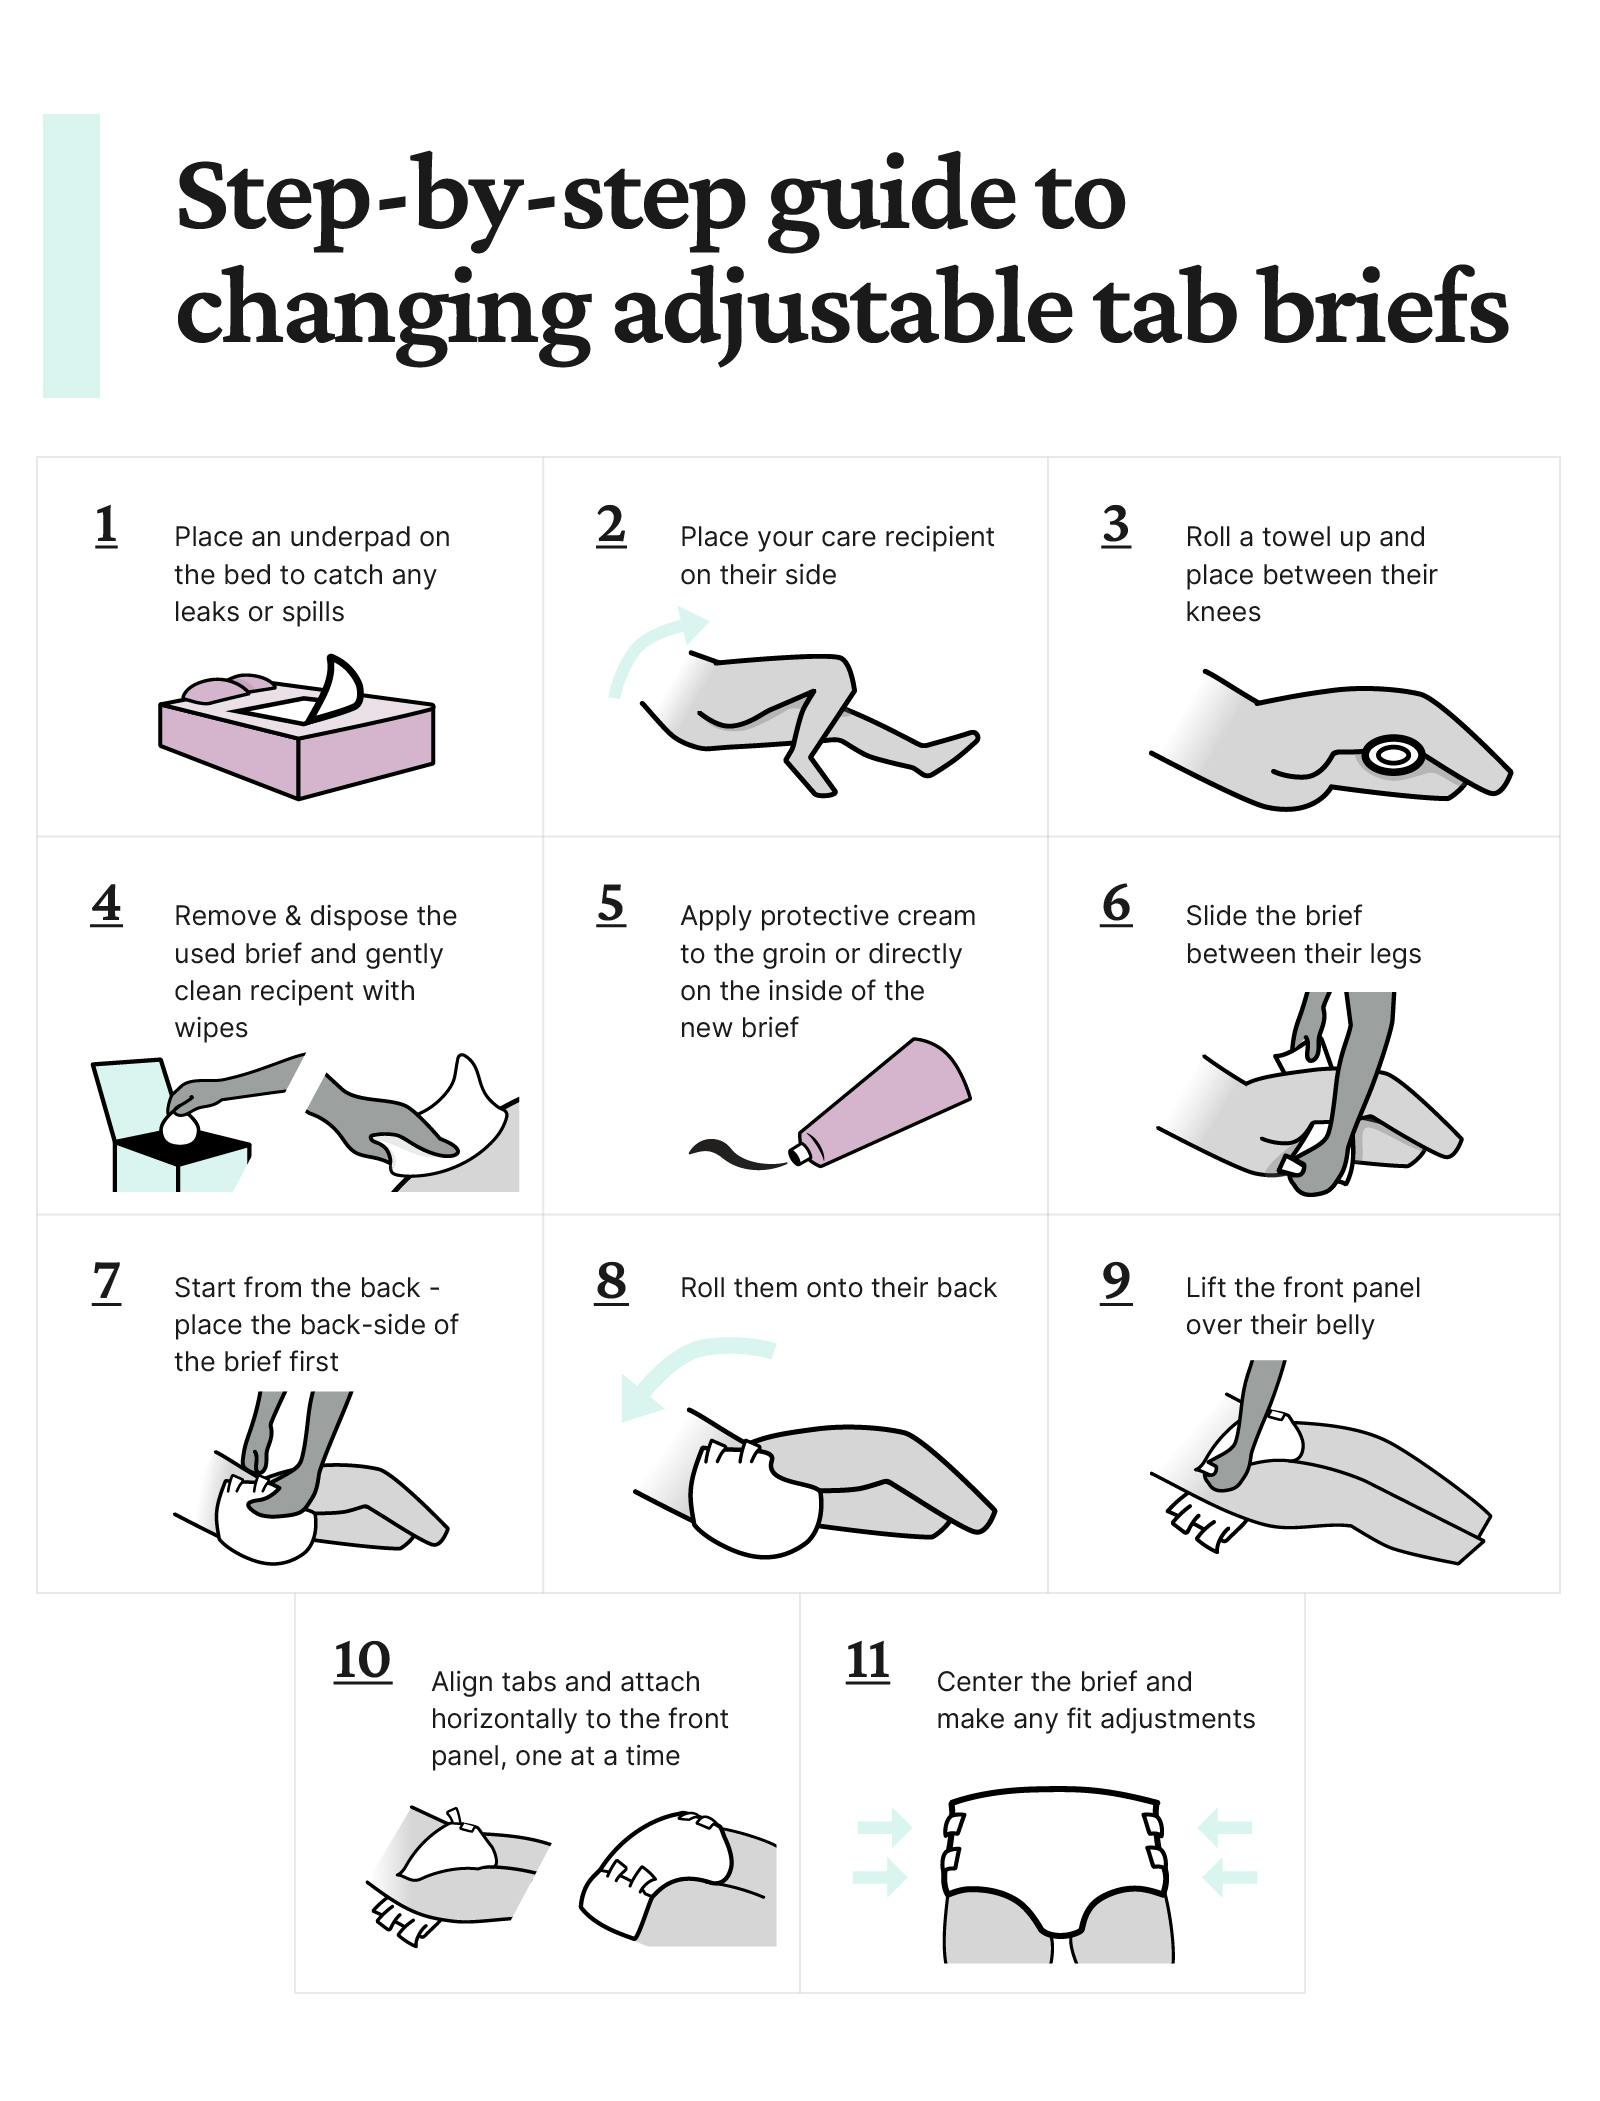 Illustrated step-by-step guide to changing adjustable tab briefs